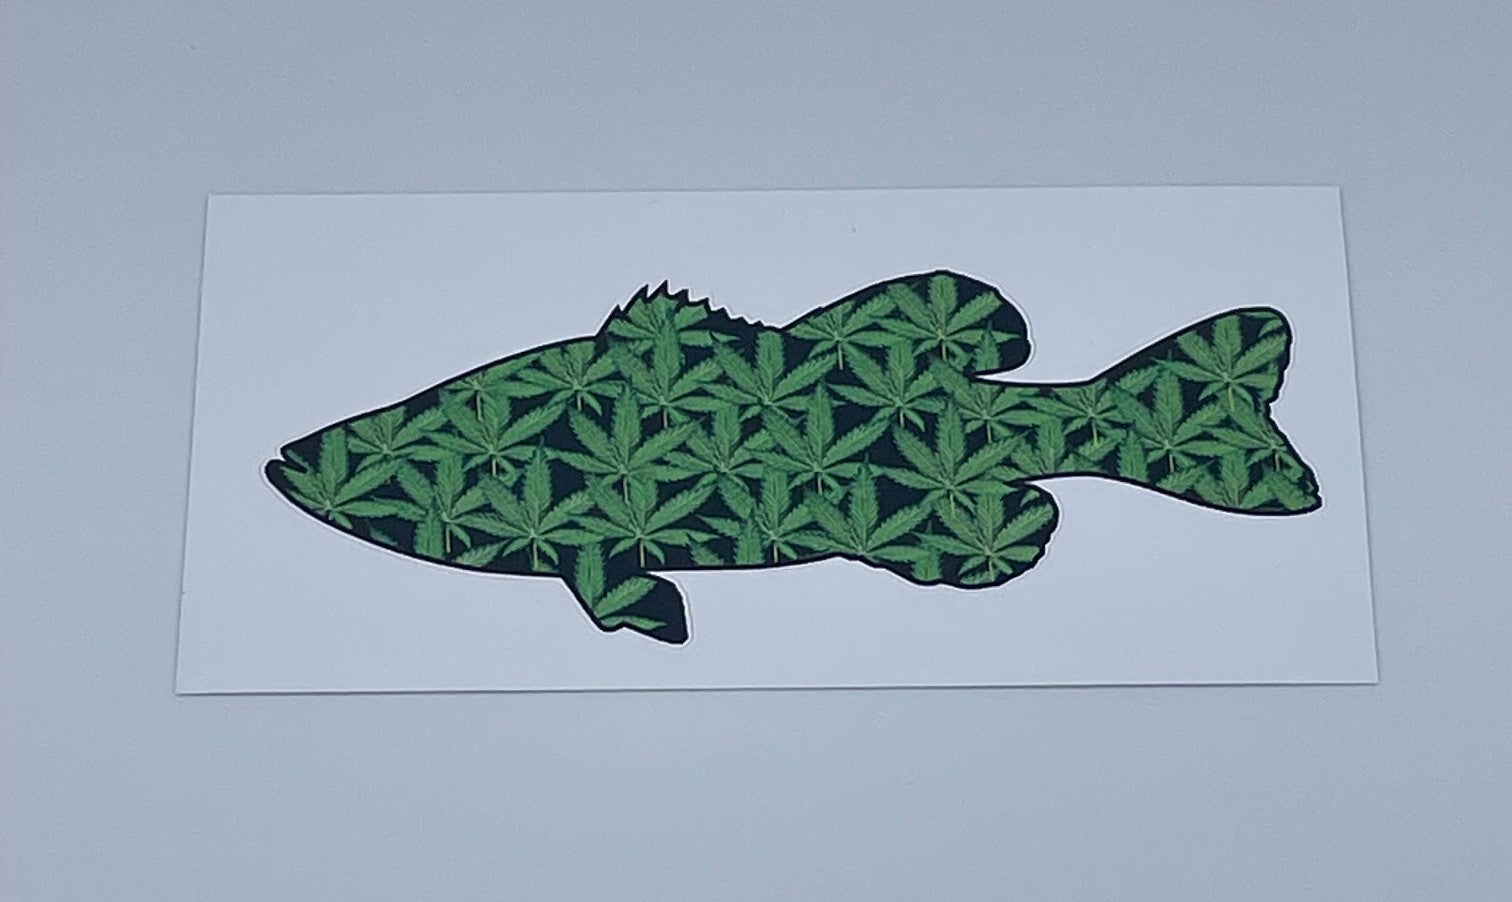 Bass Fish Decal - Available in Various Designs